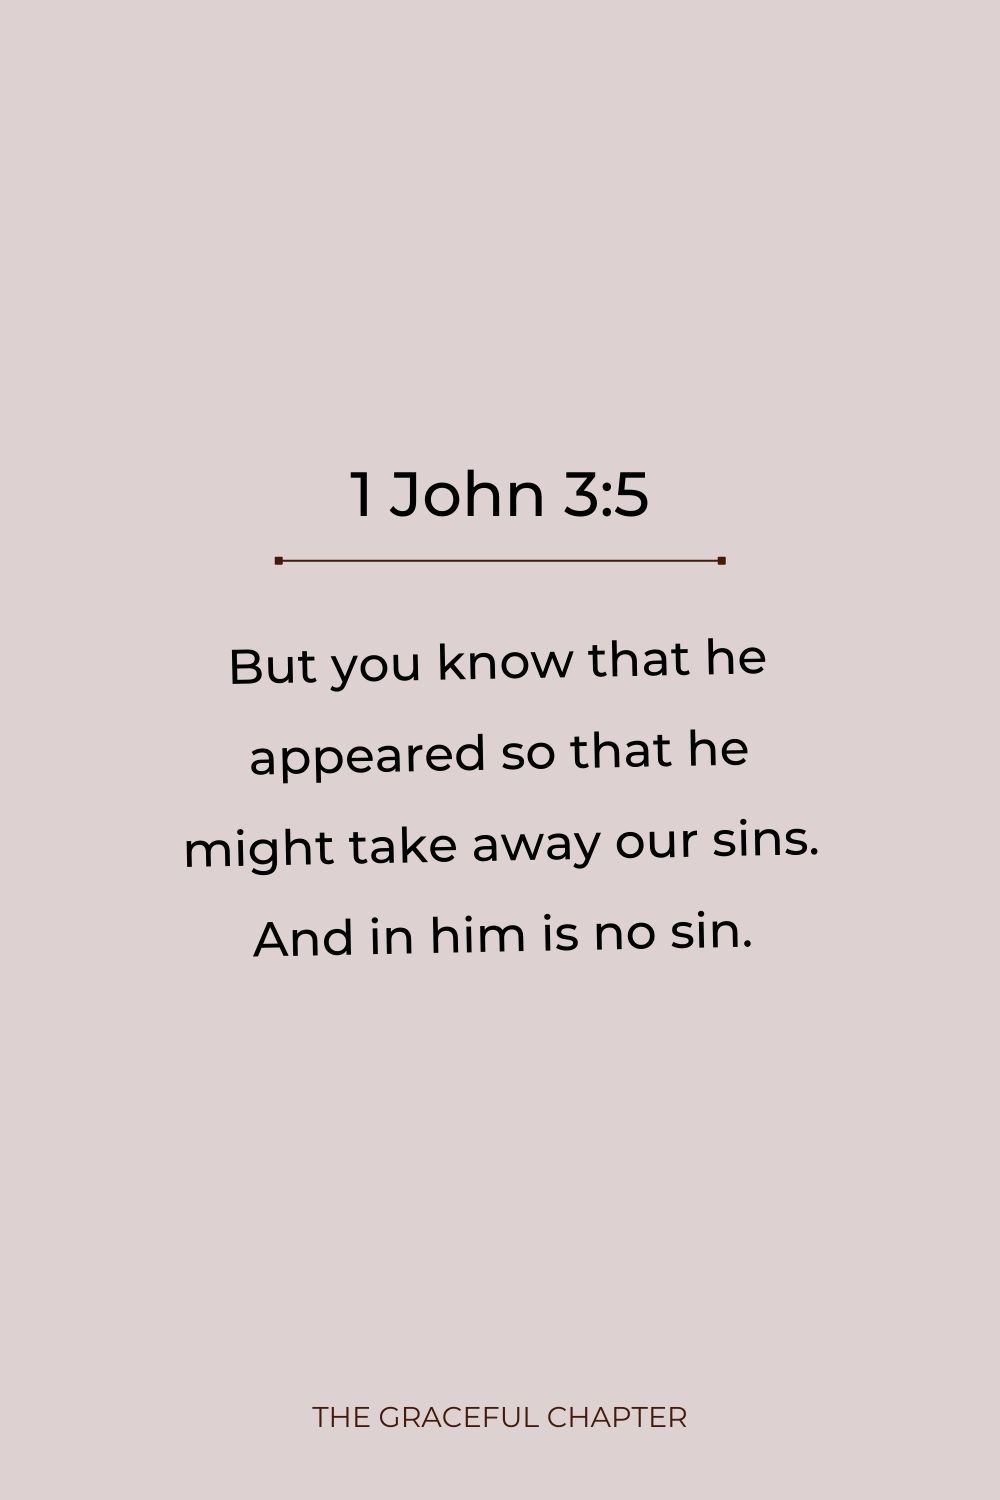 But you know that he appeared so that he might take away our sins. And in him is no sin. 1 John 3:5